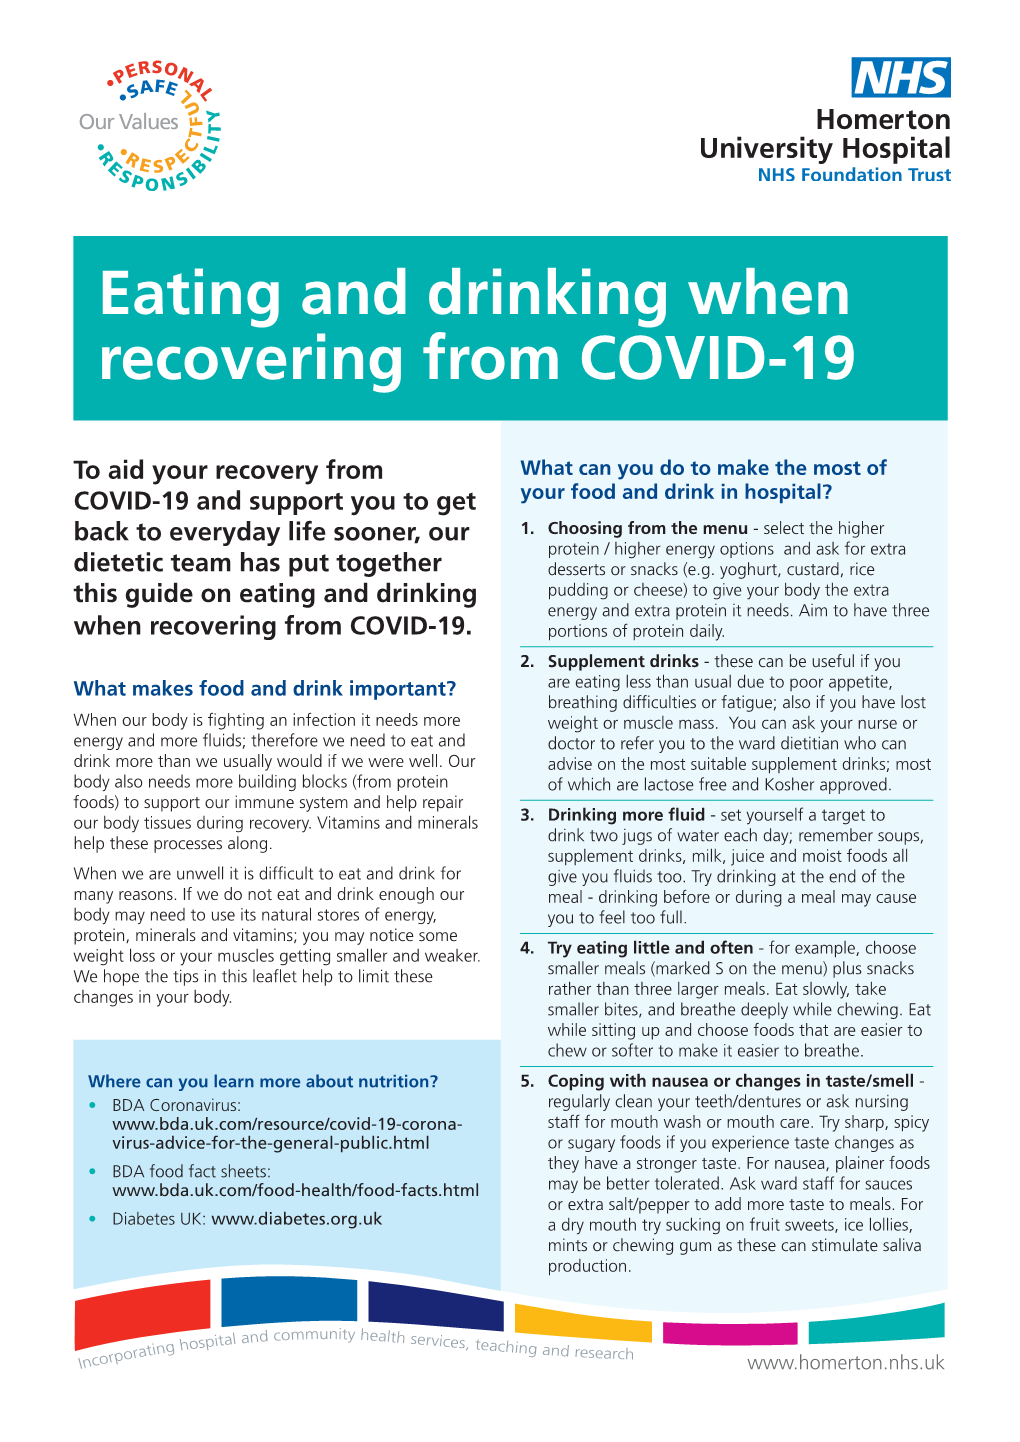 Eating and Drinking When Recovering from COVID-19